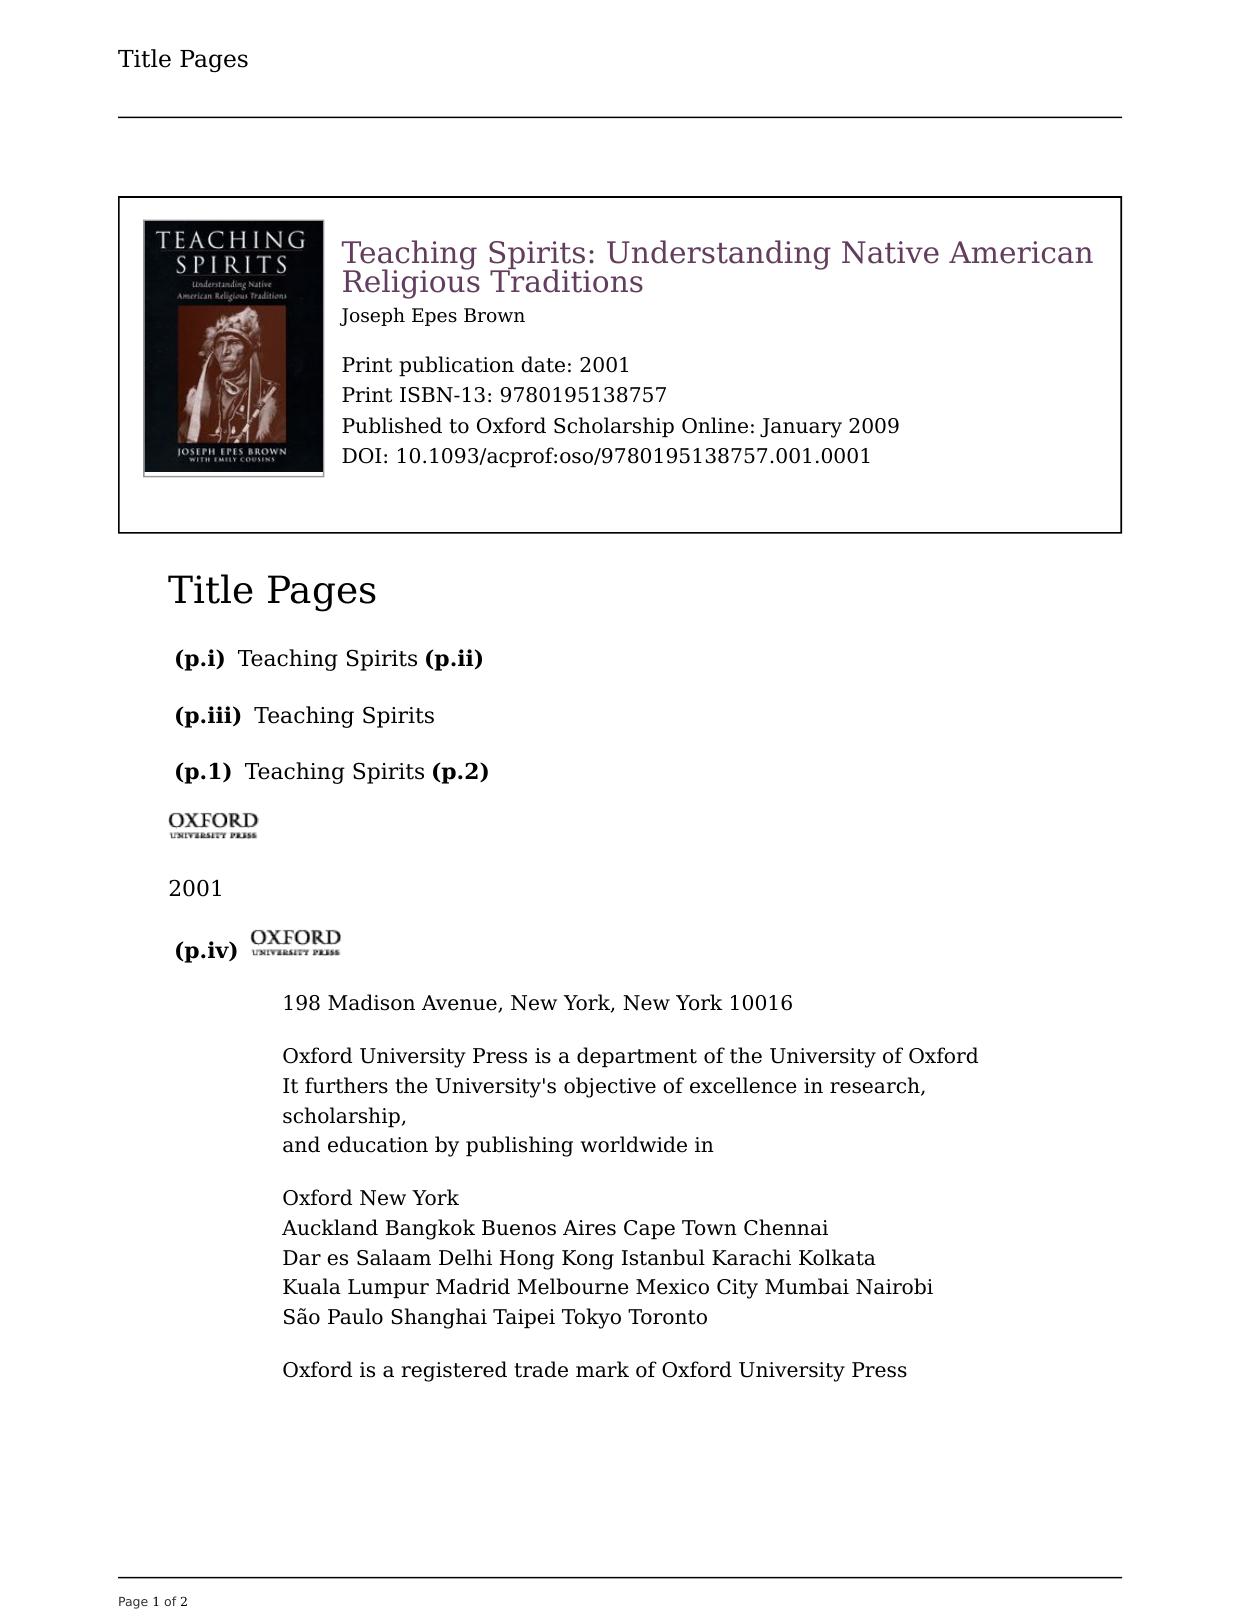 Teaching Spirits: Understanding Native American Religious Traditions by Joseph Epes Brown